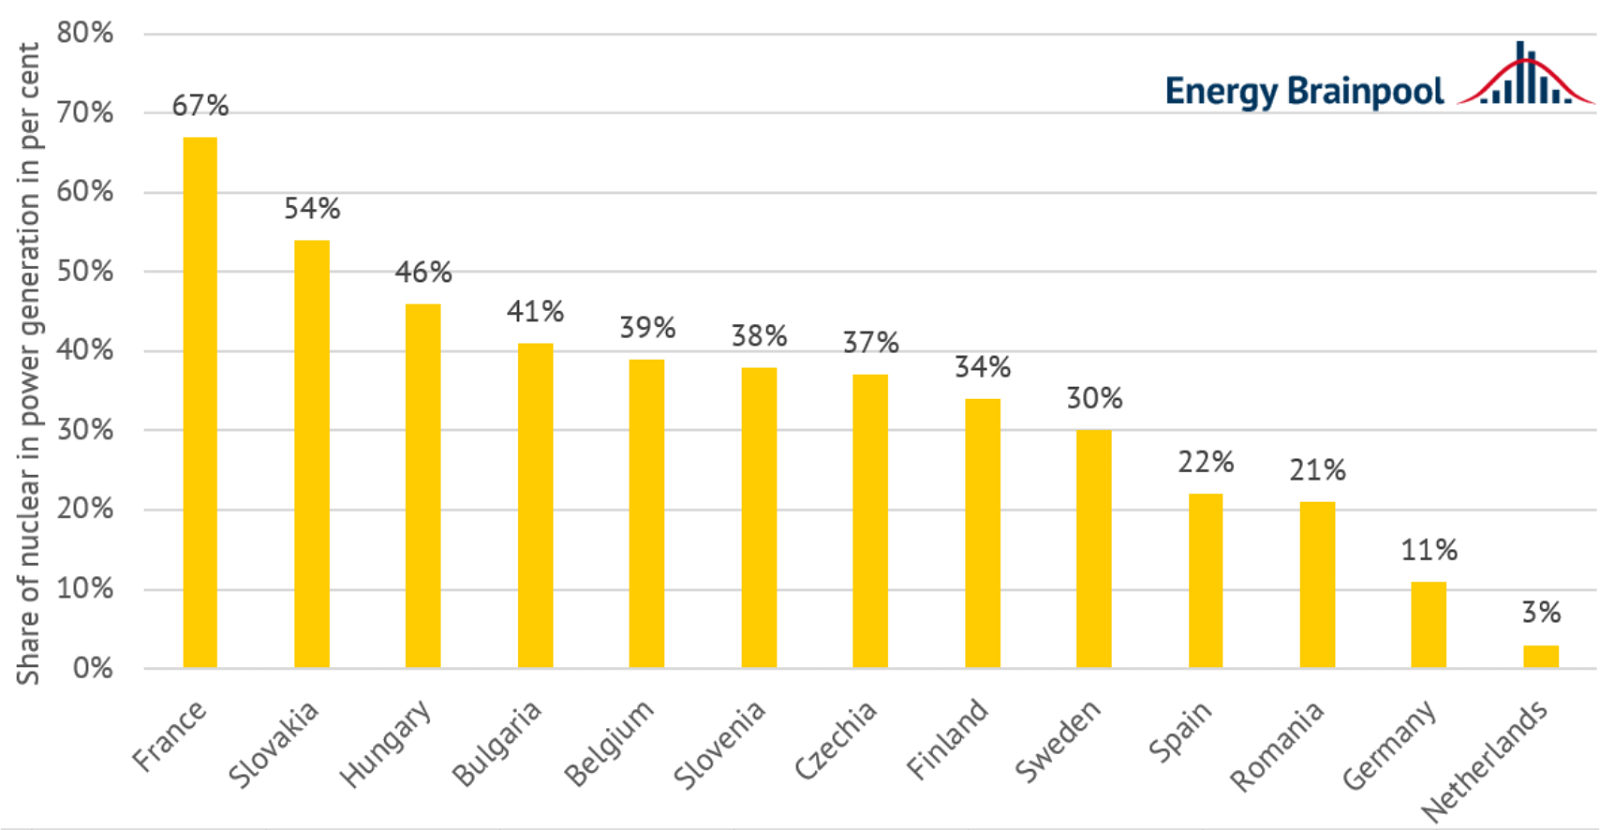 Figure 2: share of electricity generation from nuclear power plants in the 13 EU countries with nuclear energy use in 2020 (source: Energy Brainpool, data: EU Commission).